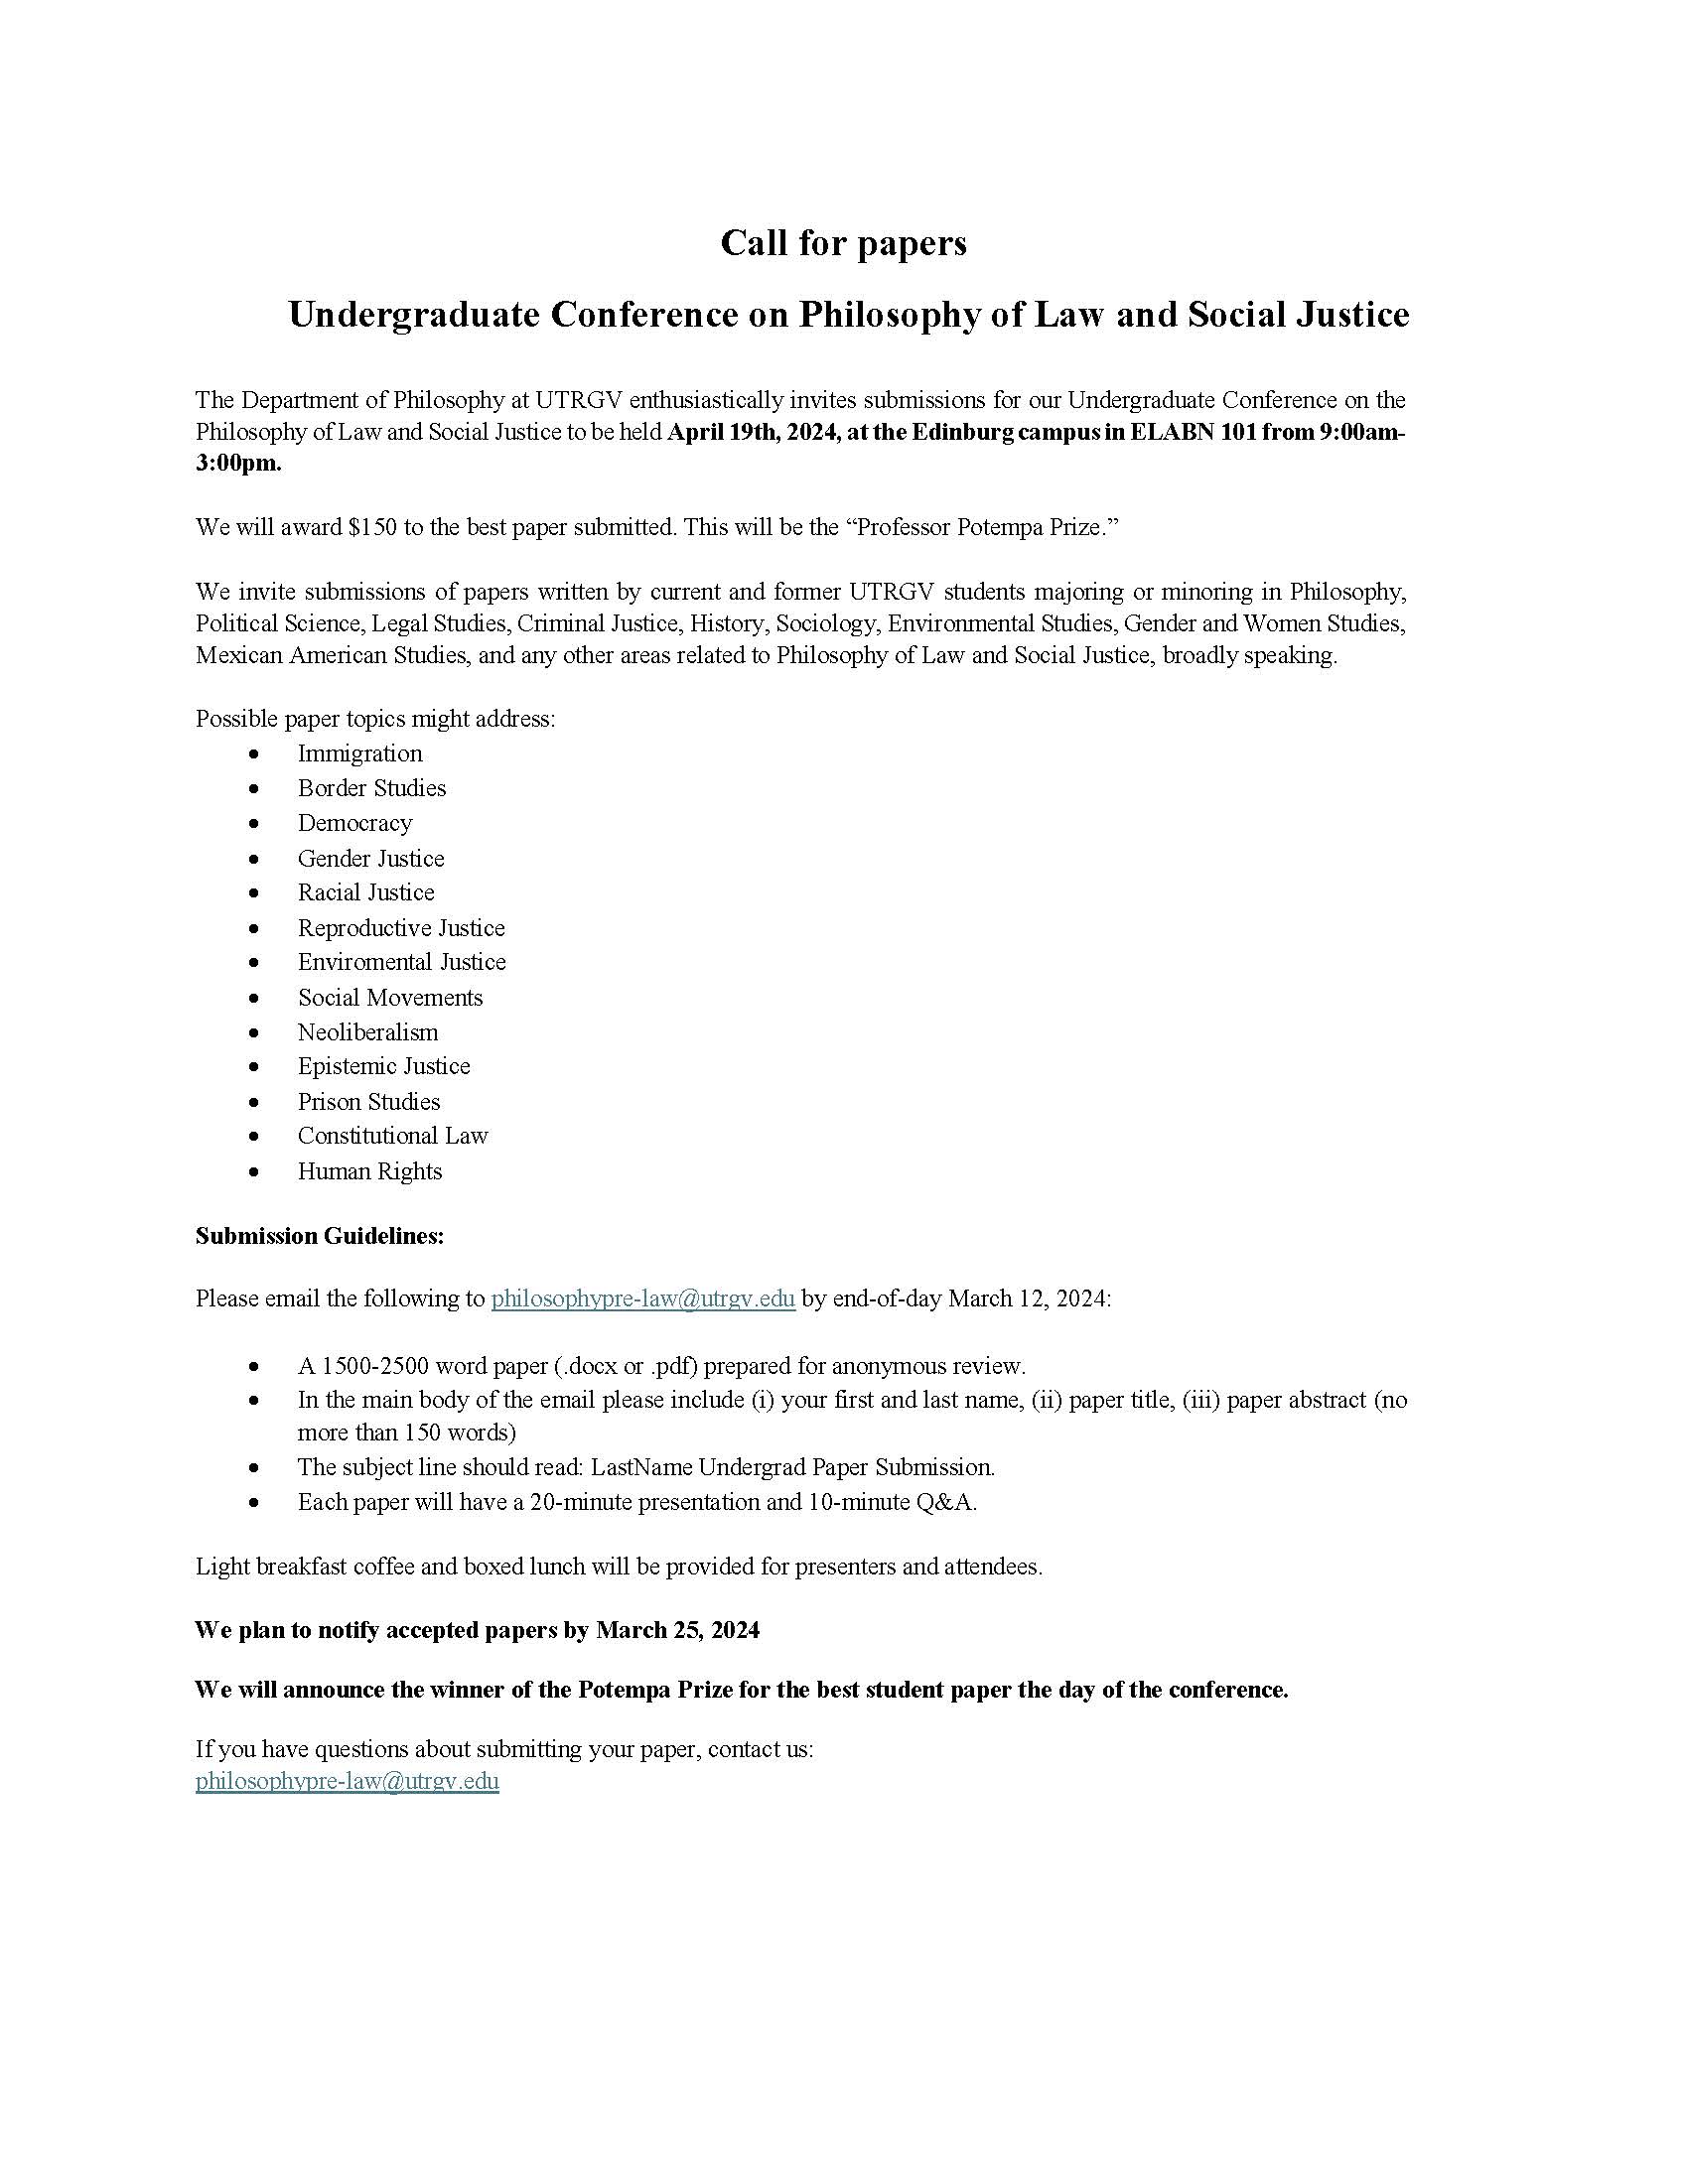 The Philosophy Pre-Law Concentration team announces a CFP for our first Undergraduate Conference on Philosophy of Law and Social Justice!